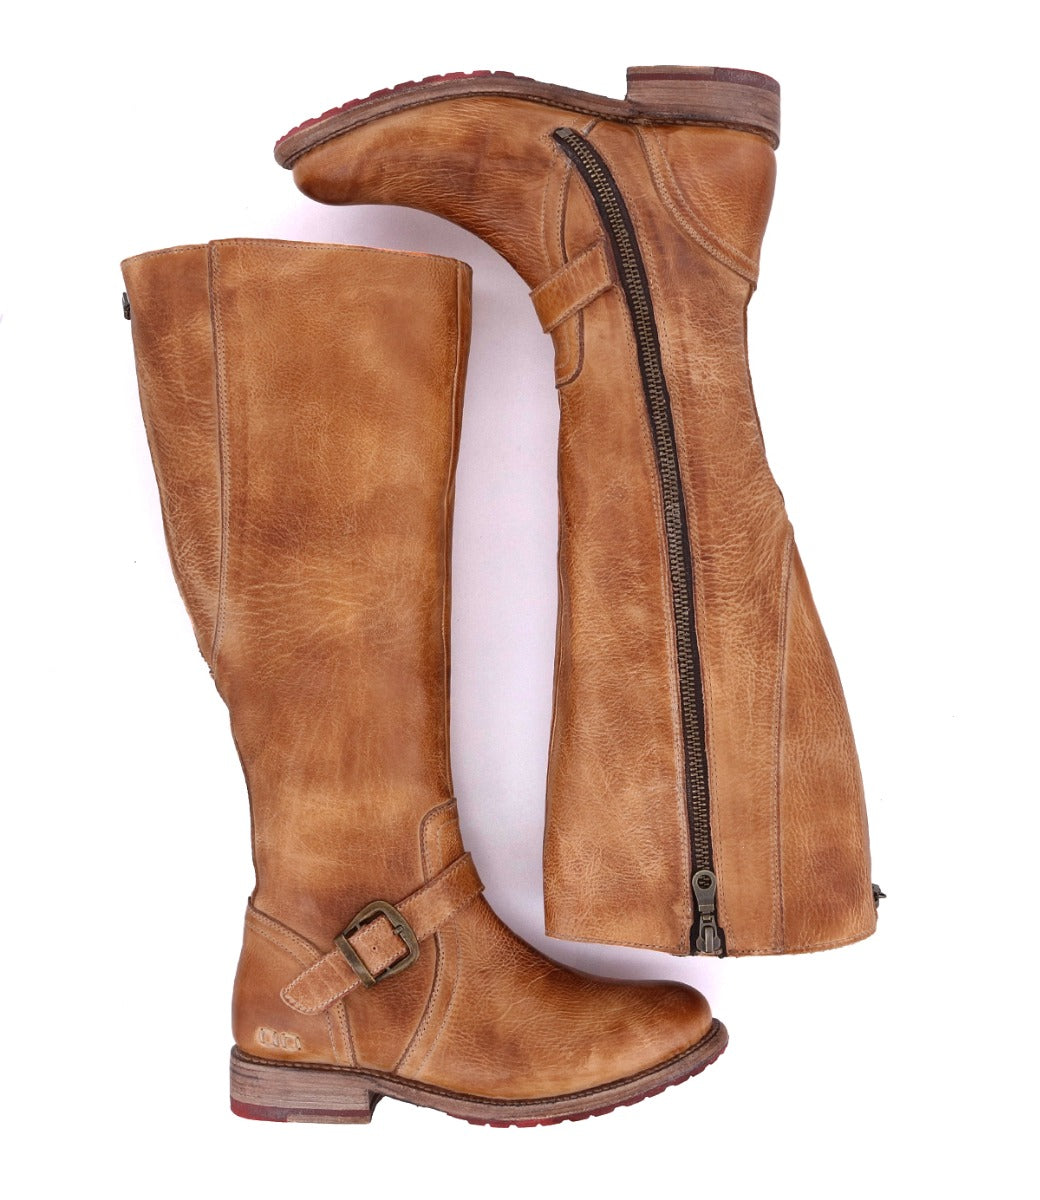 A pair of Glaye Wide Calf boots with zippers on the side by Bed Stu.